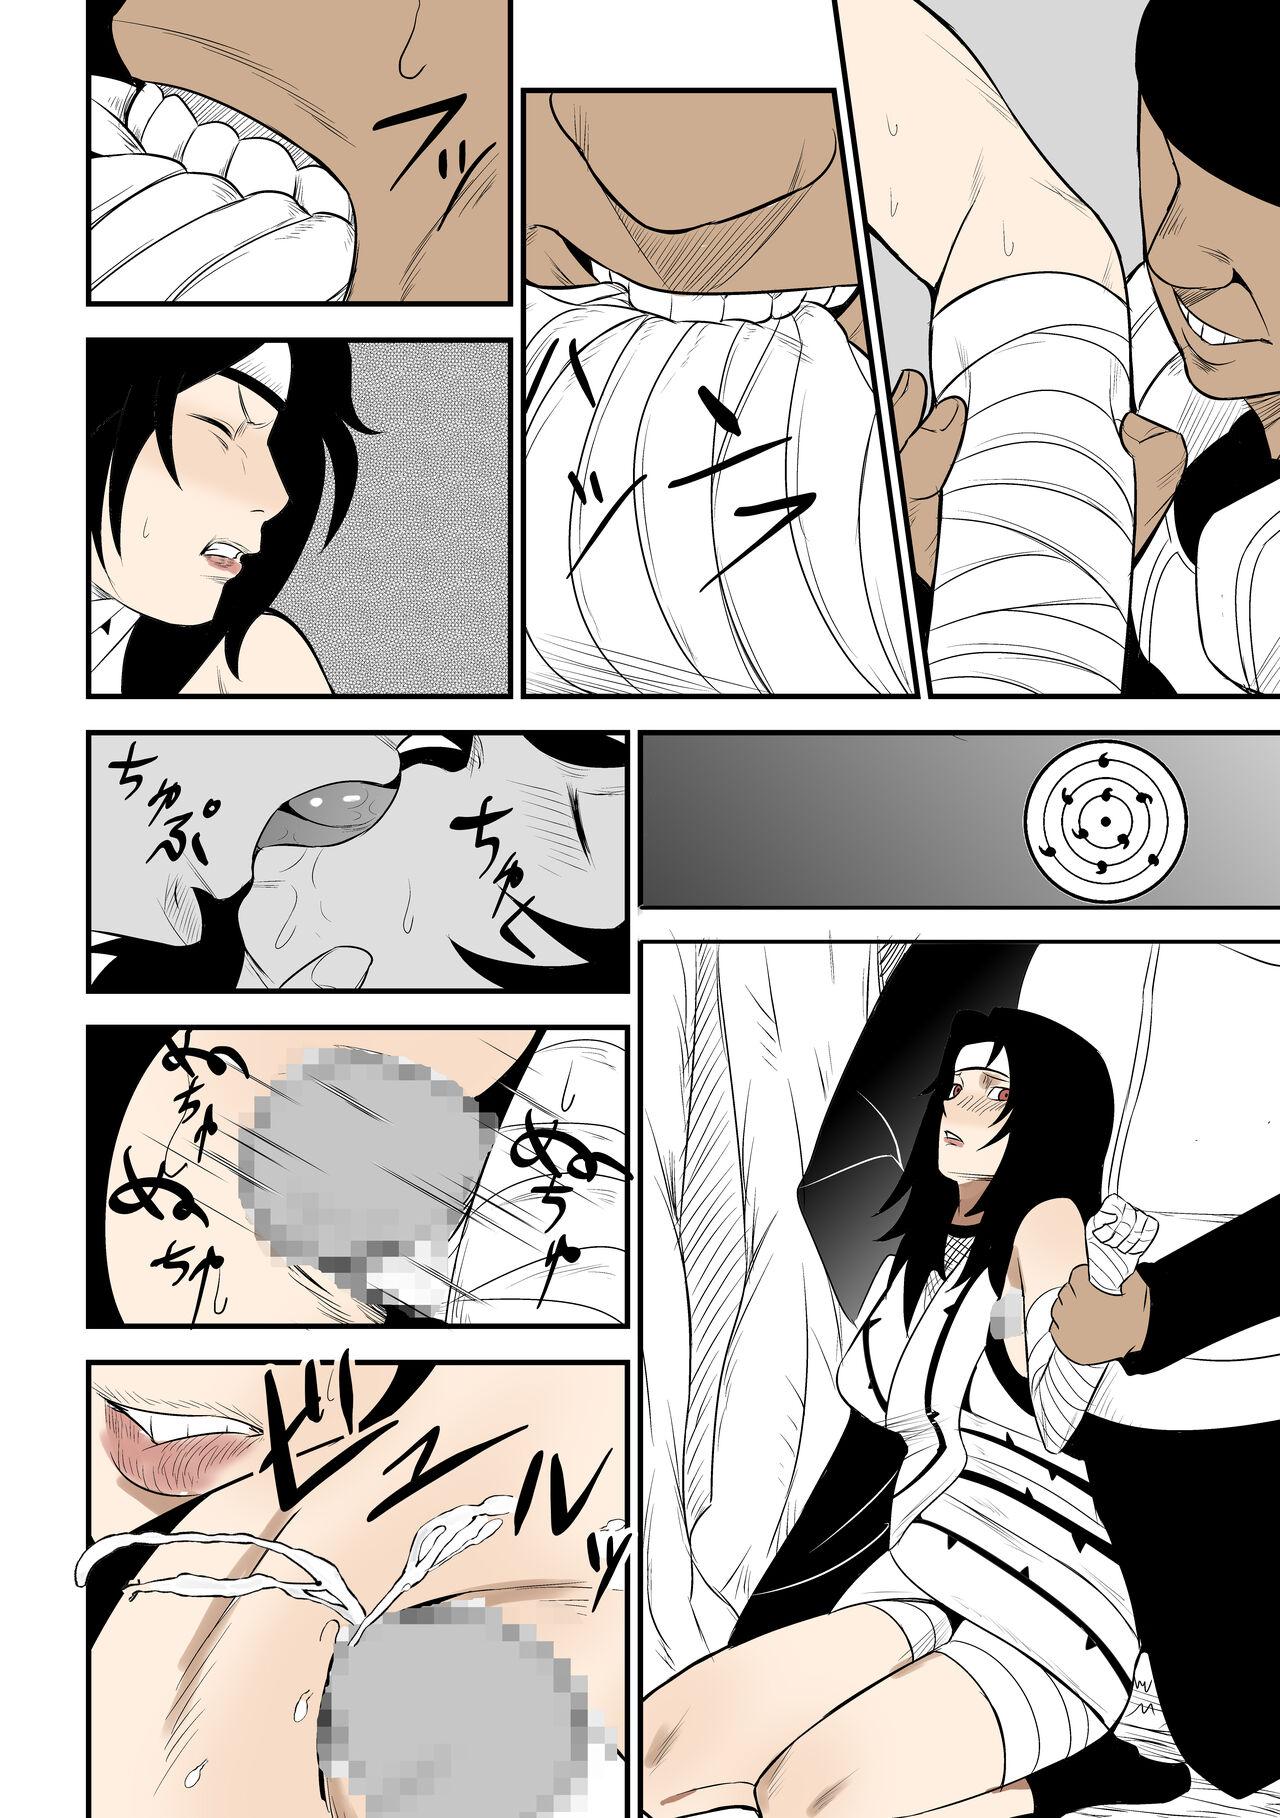 Domination 無限月読シリーズ 夕日红 - Naruto Gay Shaved - Picture 3